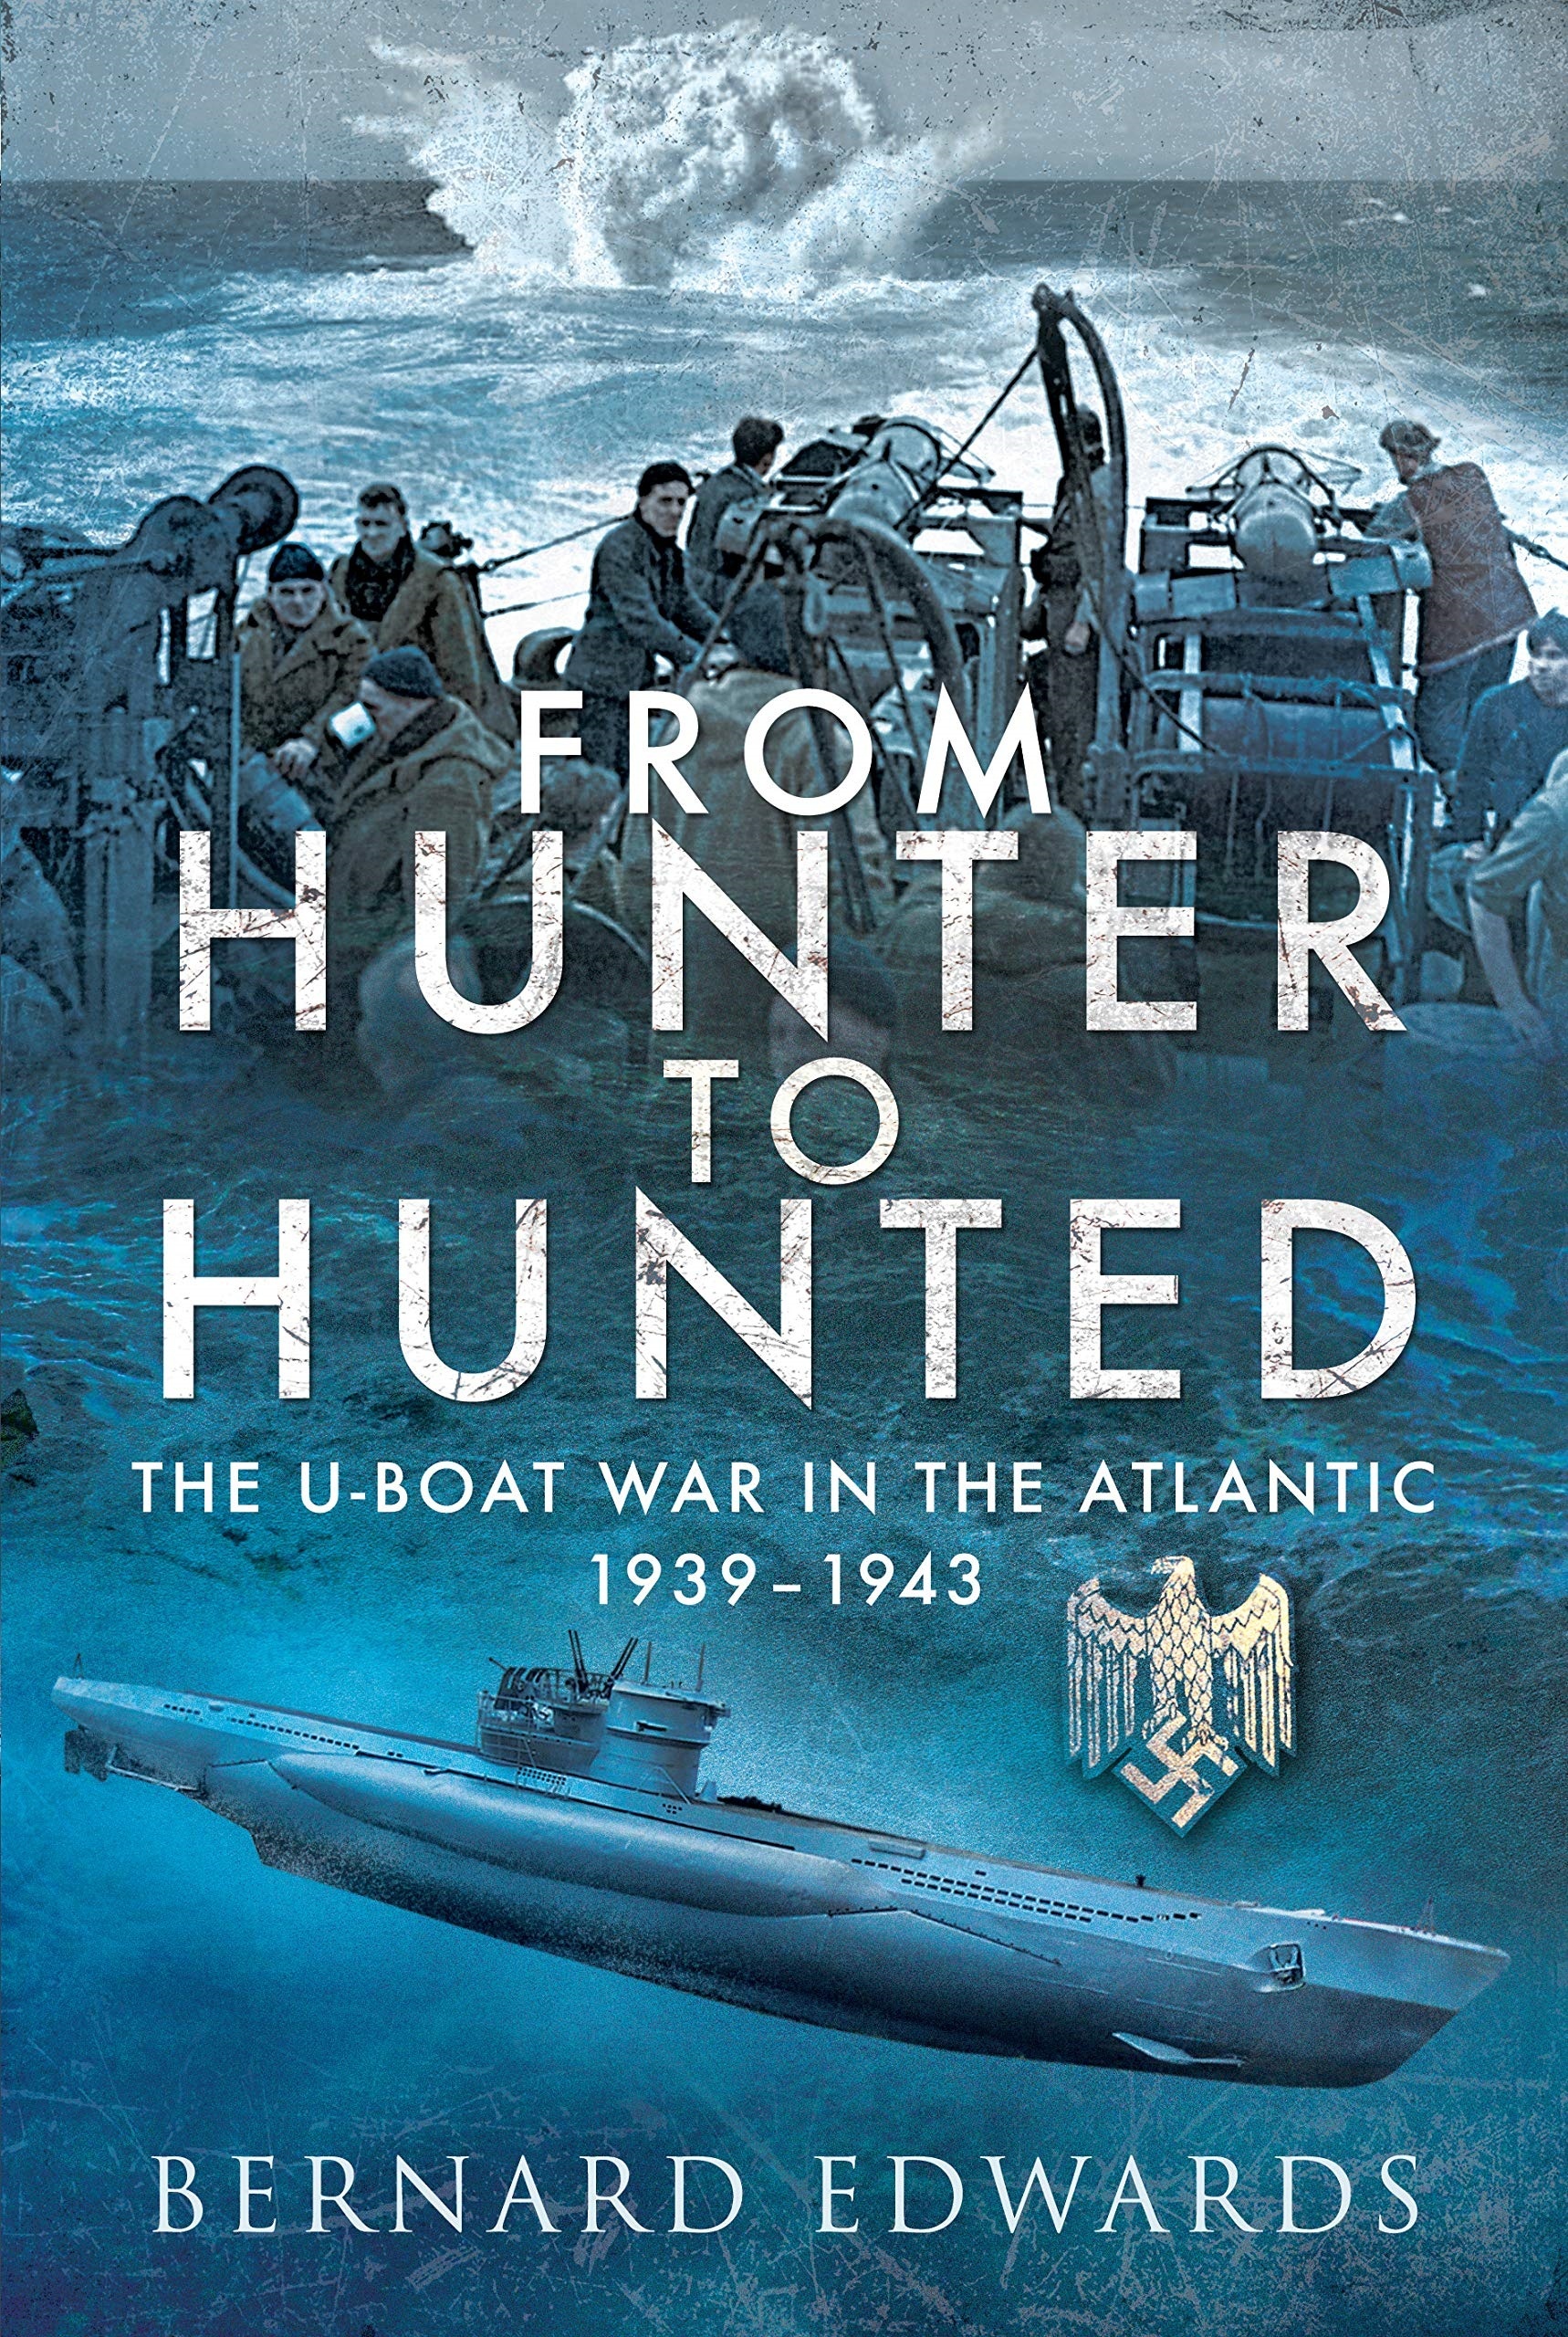 From Hunter to Hunted "The U-Boat War in the Atlantic 1939-1943"